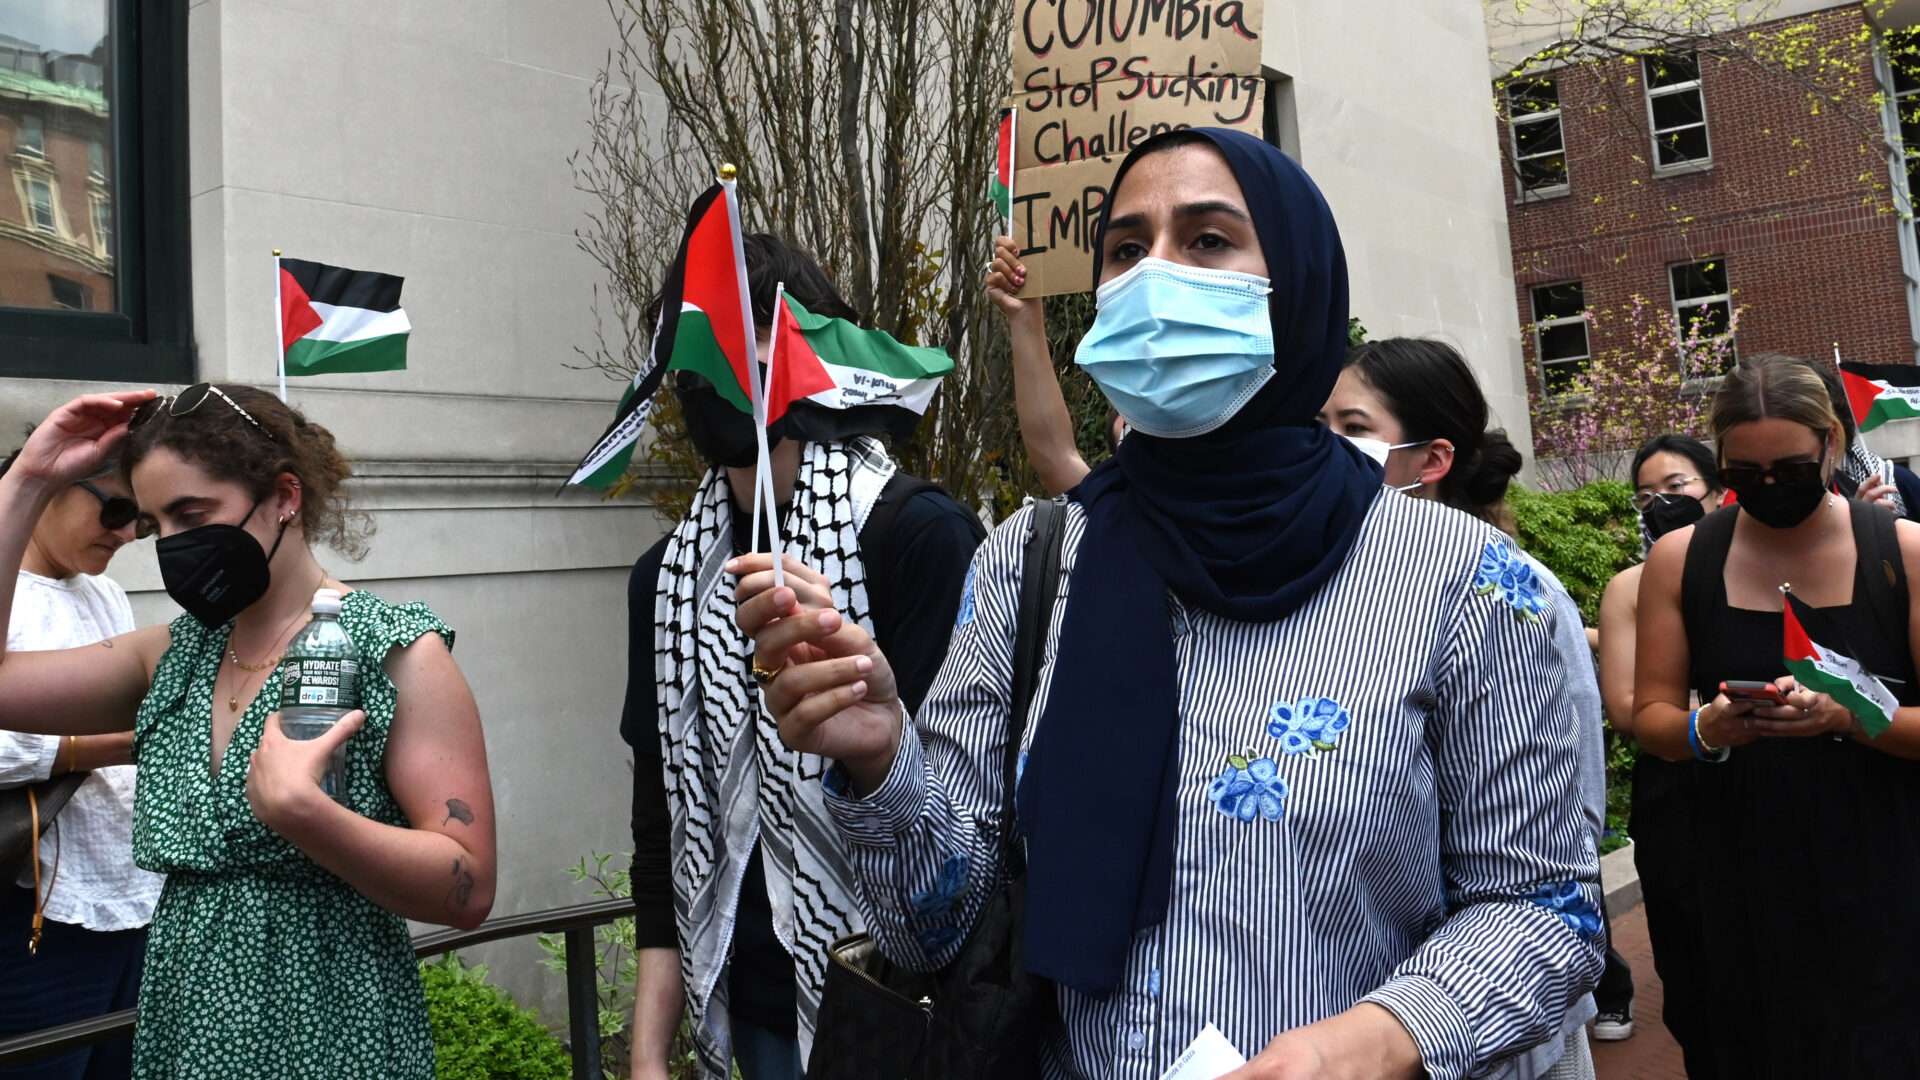 The Antisemitism Awareness Act Will Make It Illegal To Criticize Israel on Campus